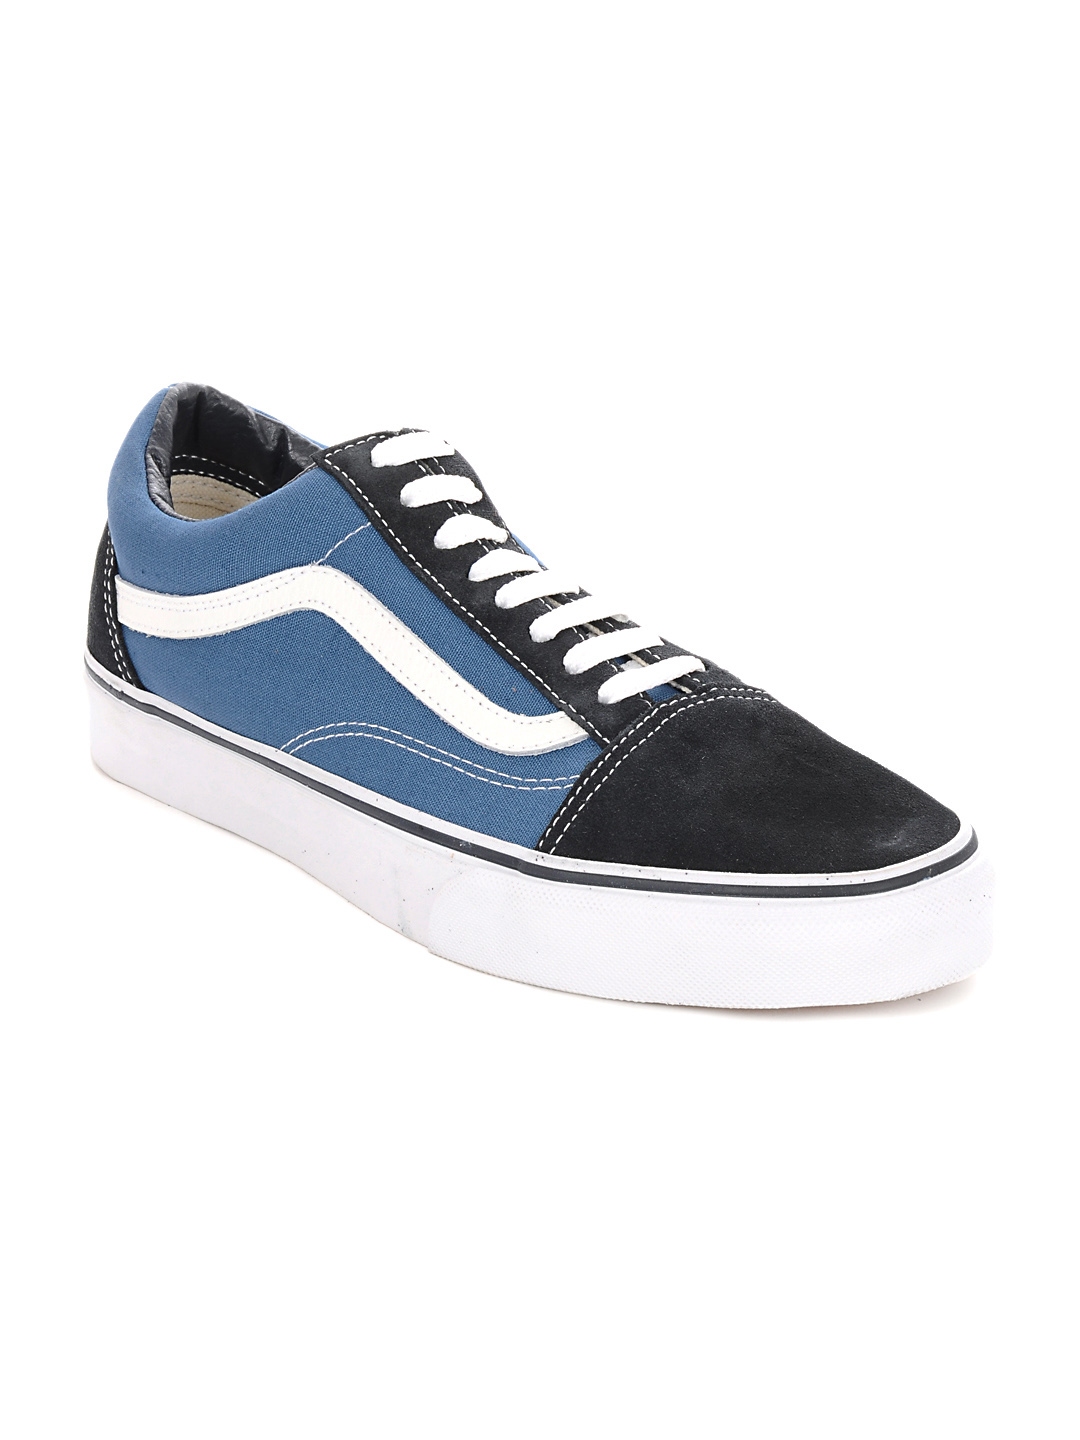 Buy Vans Unisex Blue Shoes - Casual Shoes for Unisex 79544 | Myntra